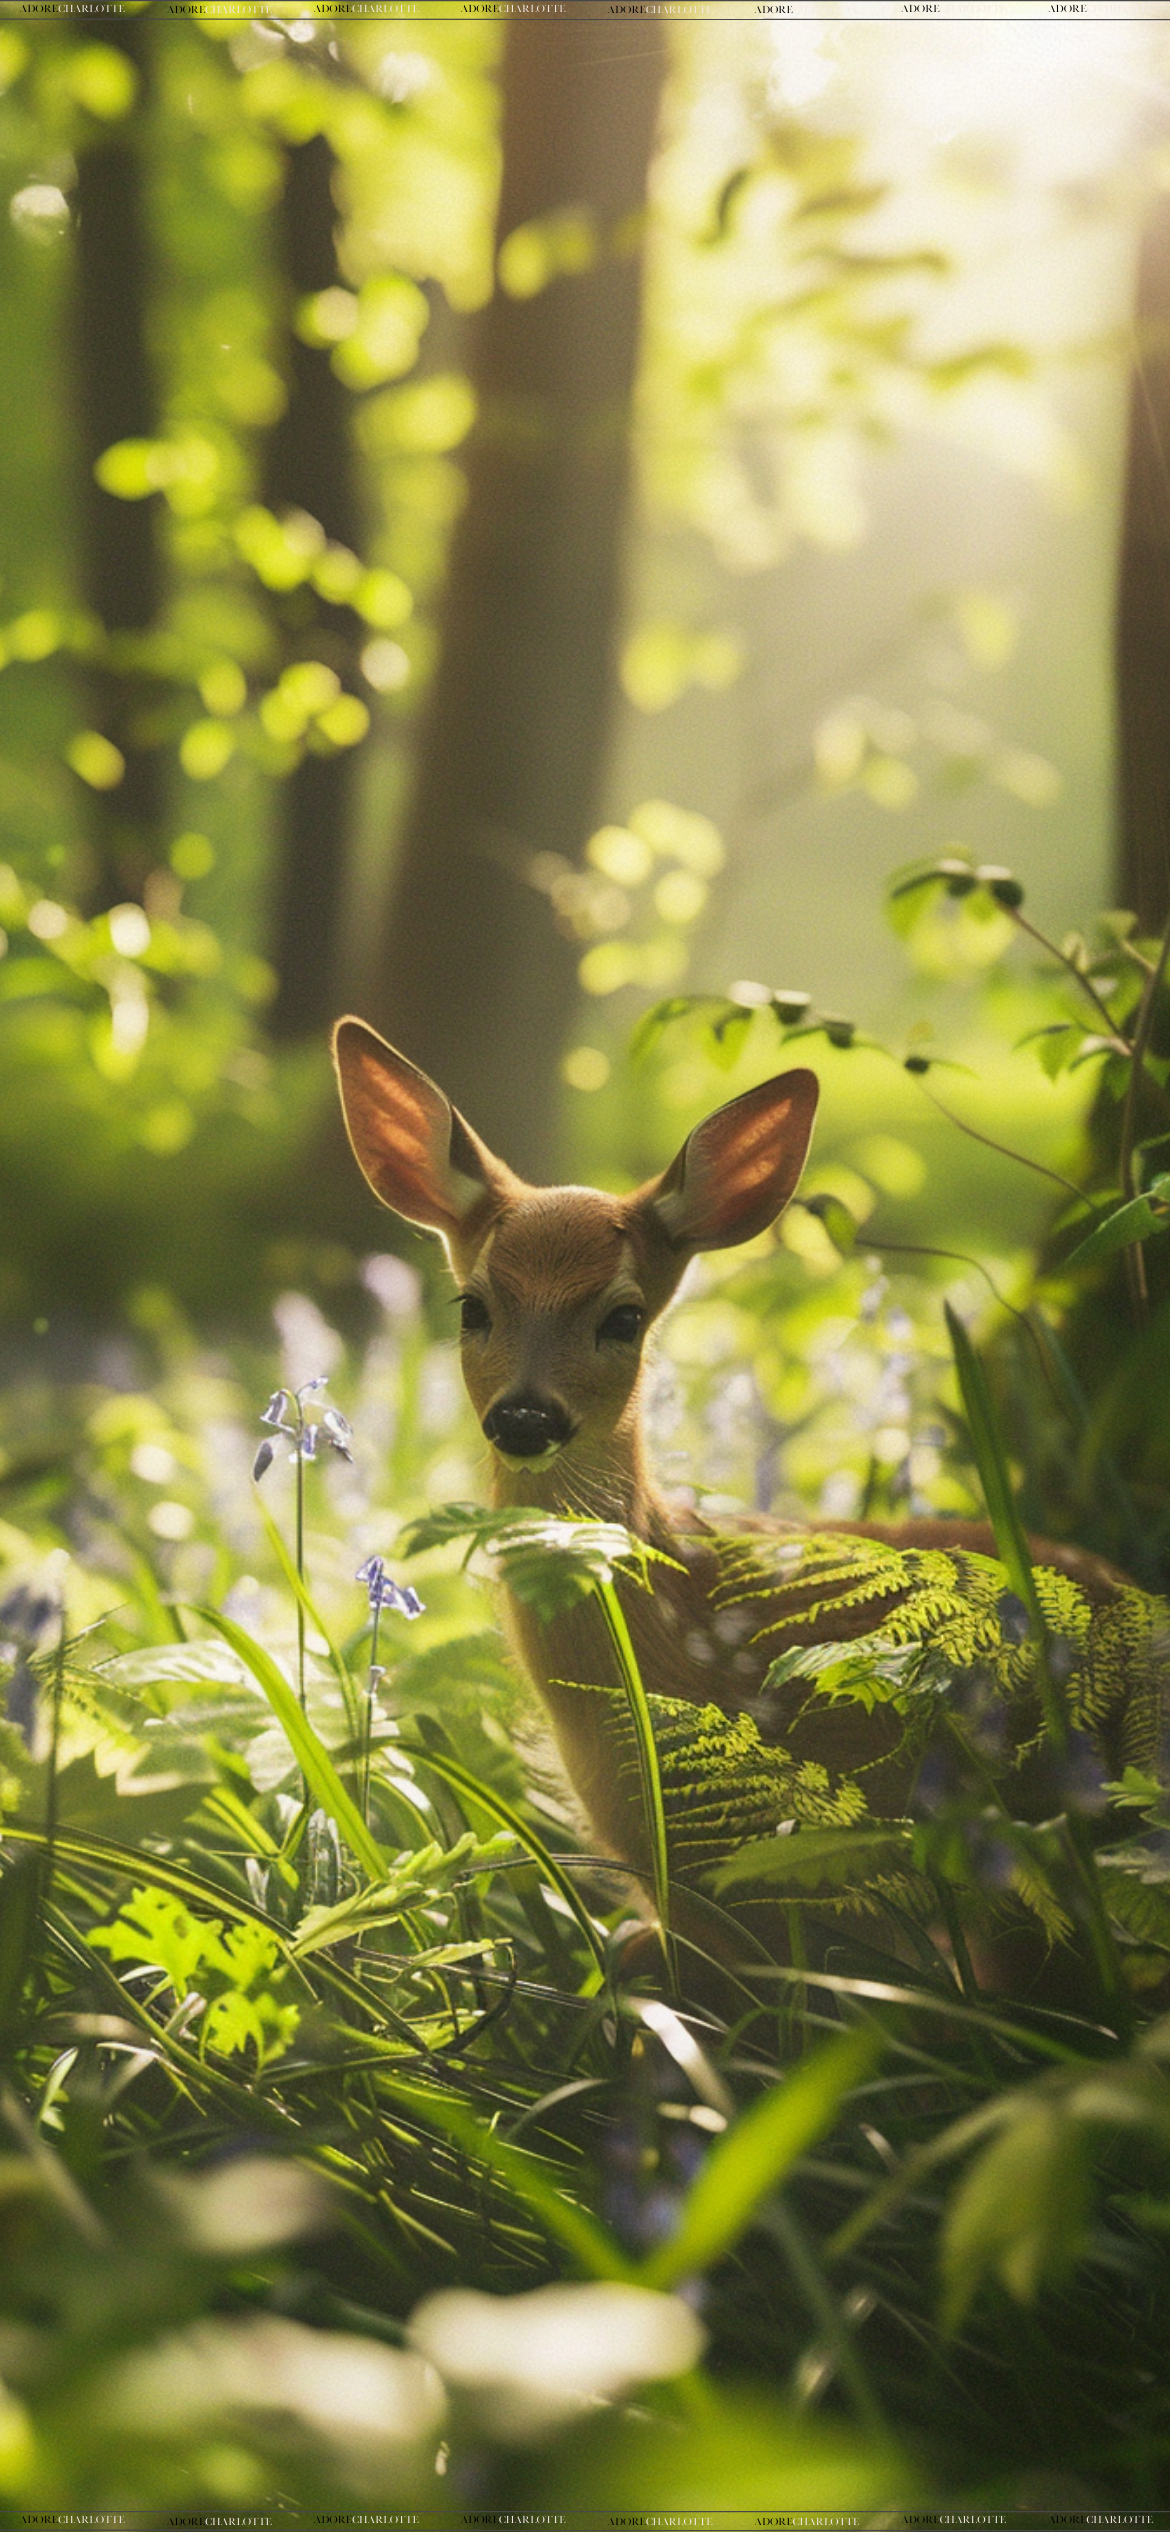 An Iphone Mockup with Awakening of the Forest & Small Deers Theme iphone wallpapers Baby Deer.